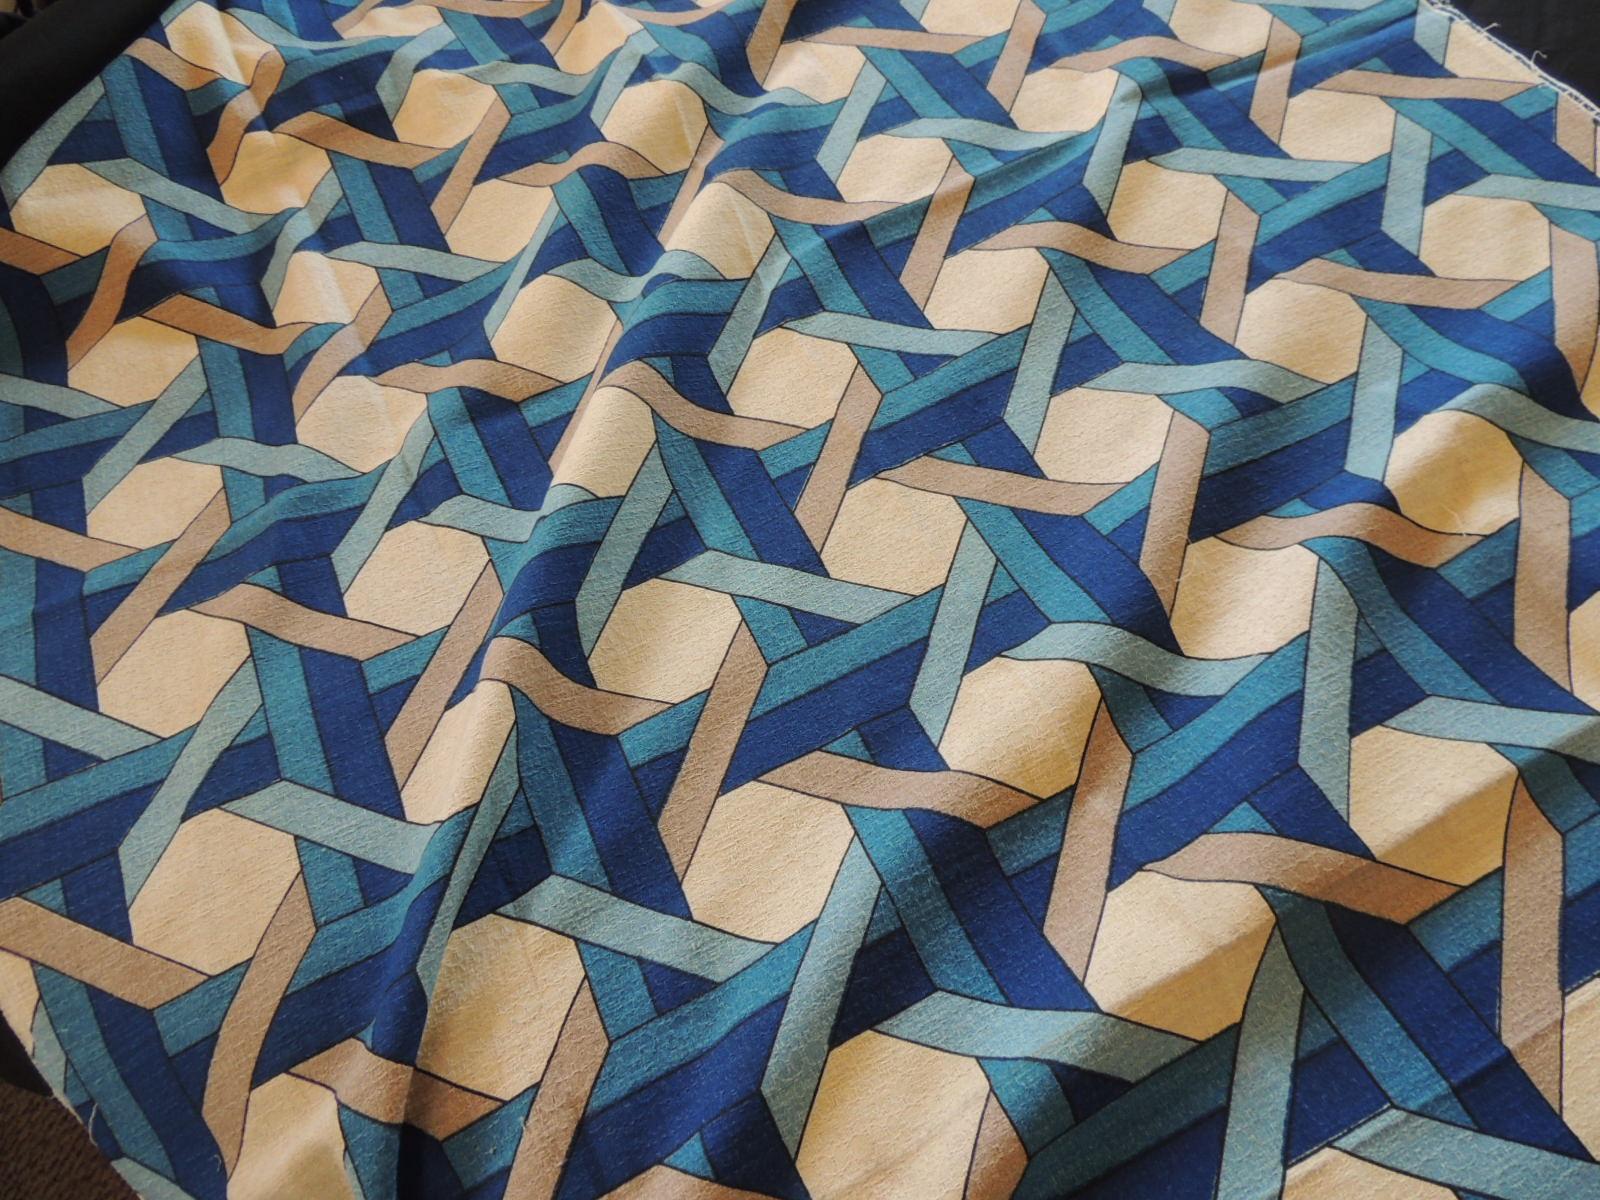 Fabric by The Yard: Vintage blue and tan trellis pattern bark cloth textile.
Ideal for pillows, curtains or upholstery.
Size: 23